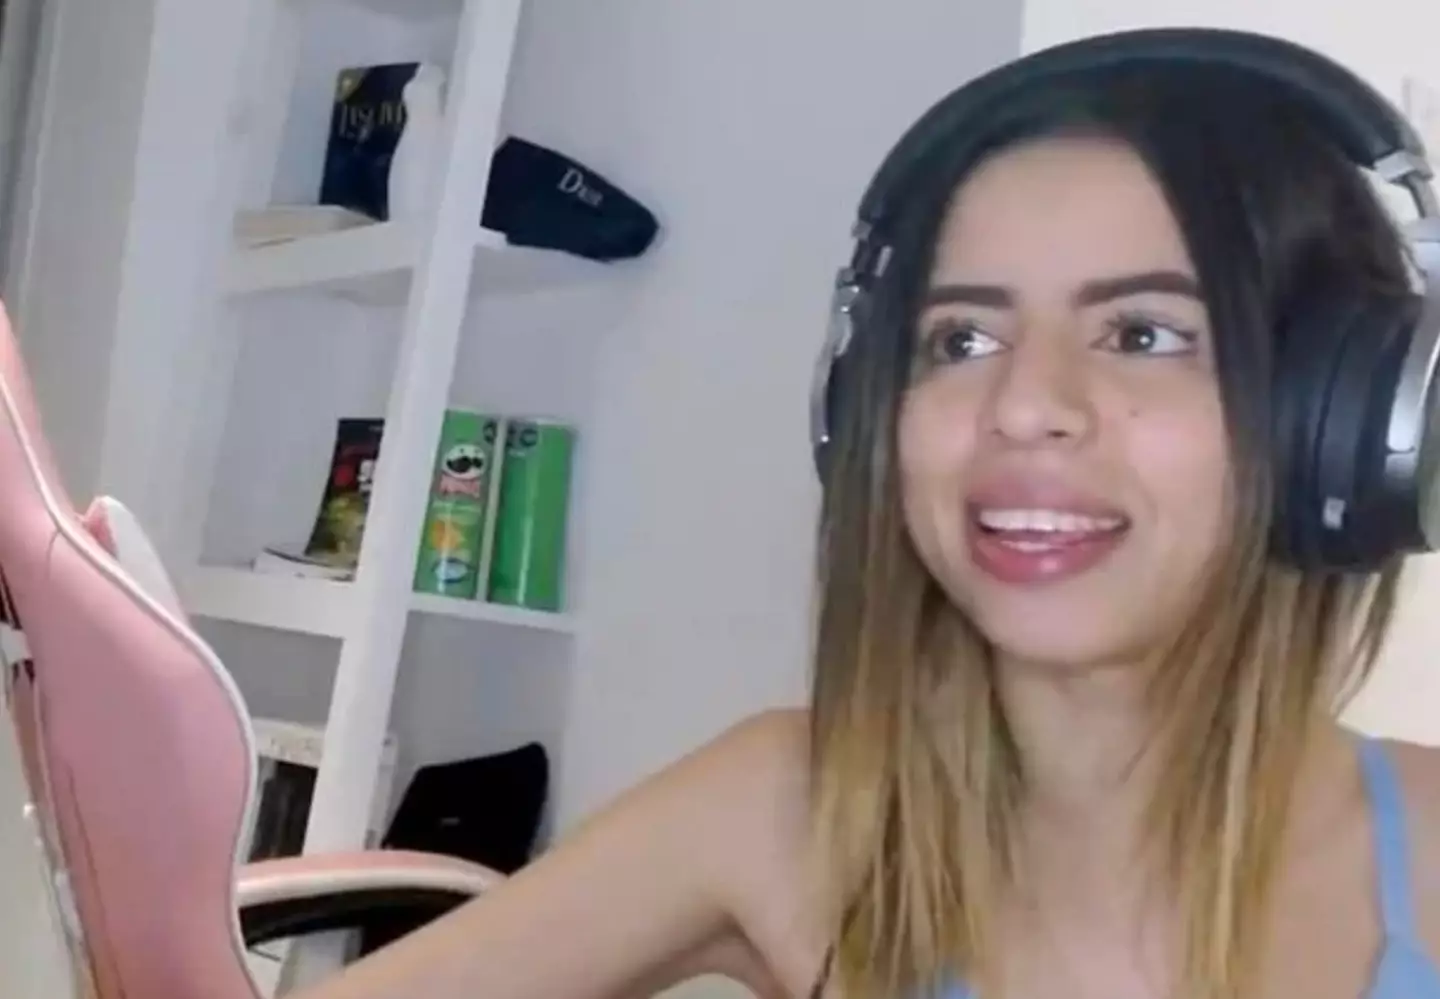 The Twitch streamer received a seven-day ban after she had sex on a live stream.